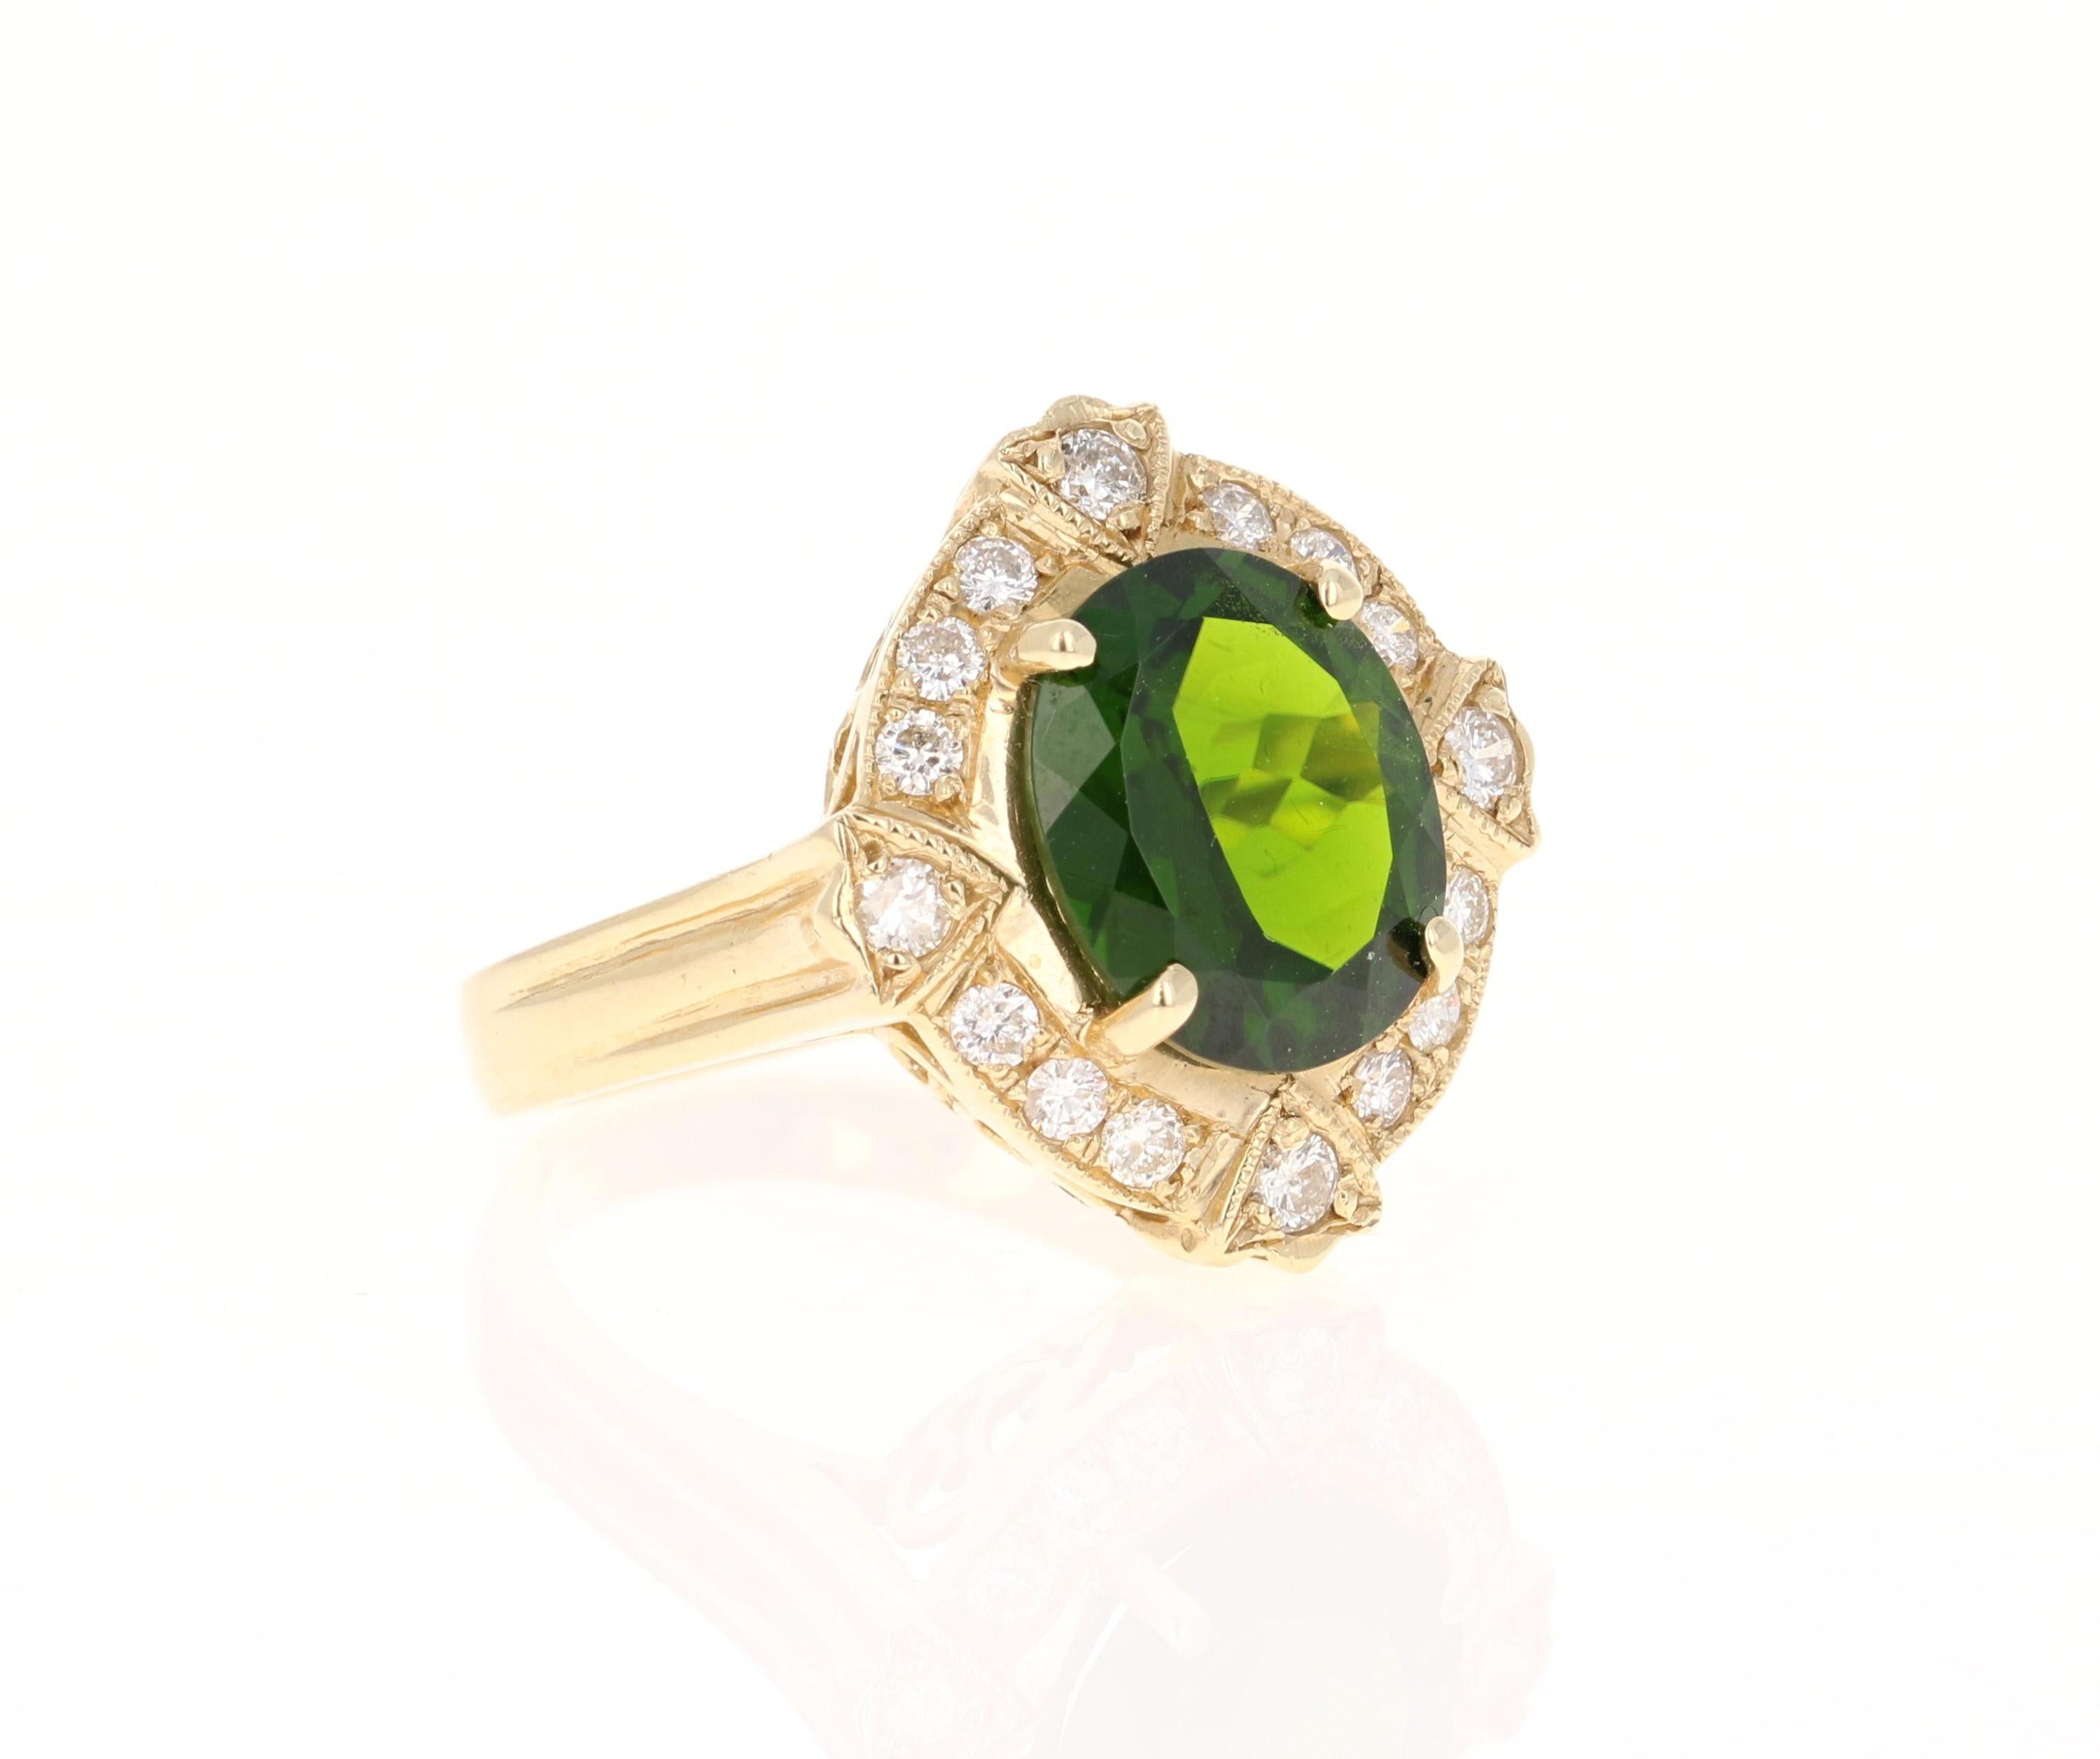 This ring has a Natural 3.44 Carat Oval Cut Chrome Diopside. Chrome Diopside comes from the family of Diopside and is mined most exclusively in Siberia and even some parts of Pakistan. It has a beautiful emerald green color and has less inclusions